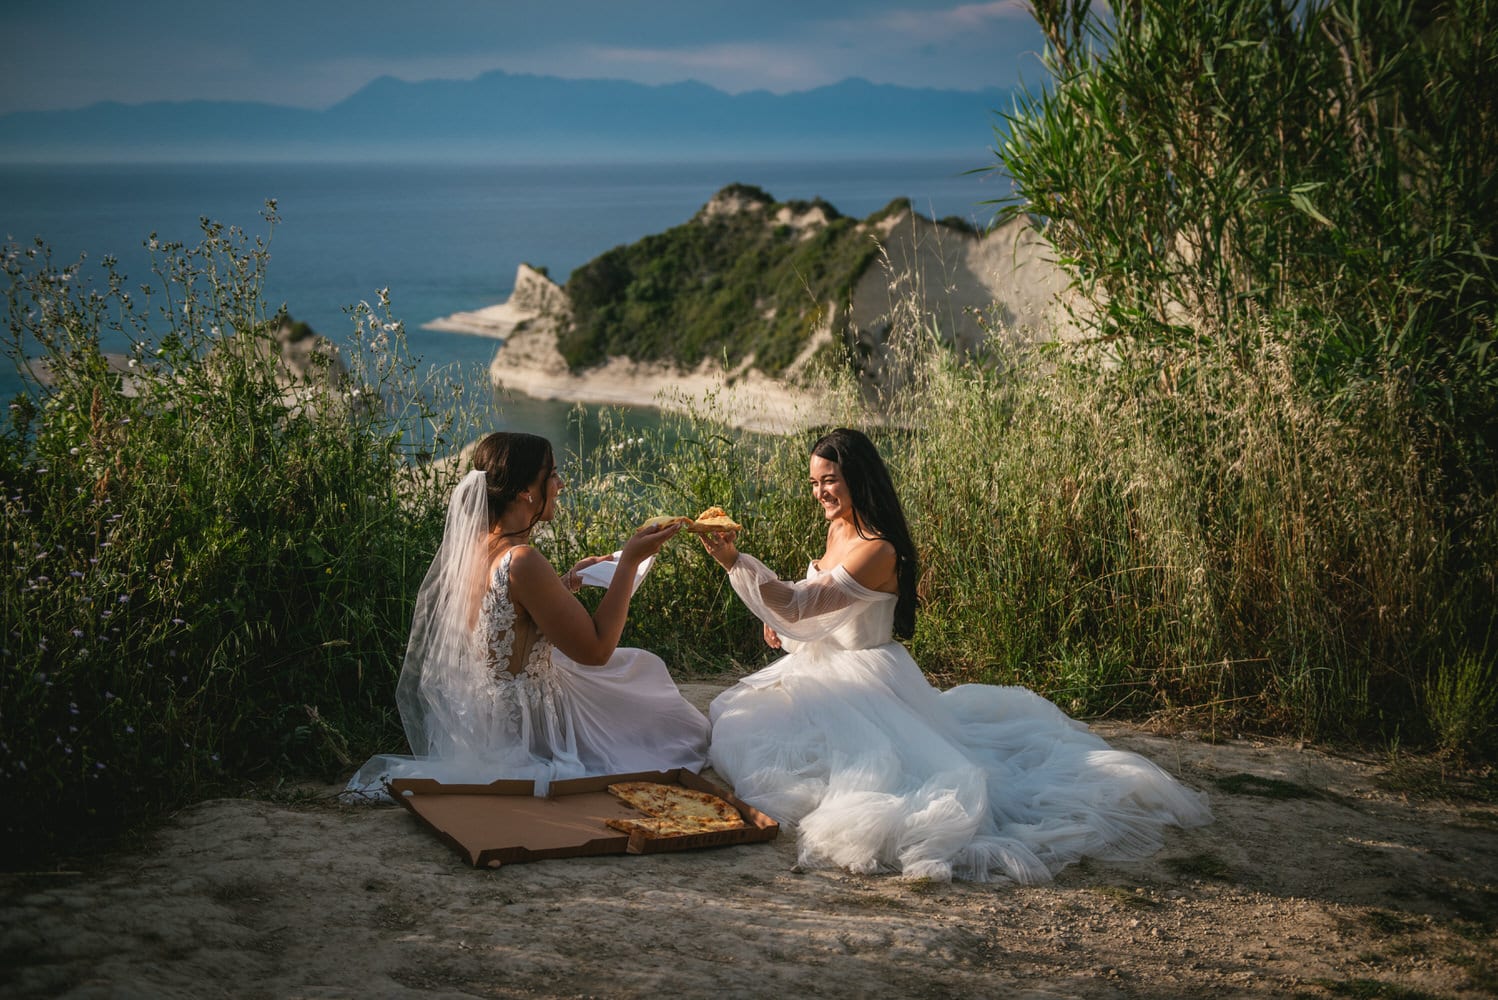 Seaside pizza picnic: Brides share laughter and a meal on the Corfu cliffs during their elopement.